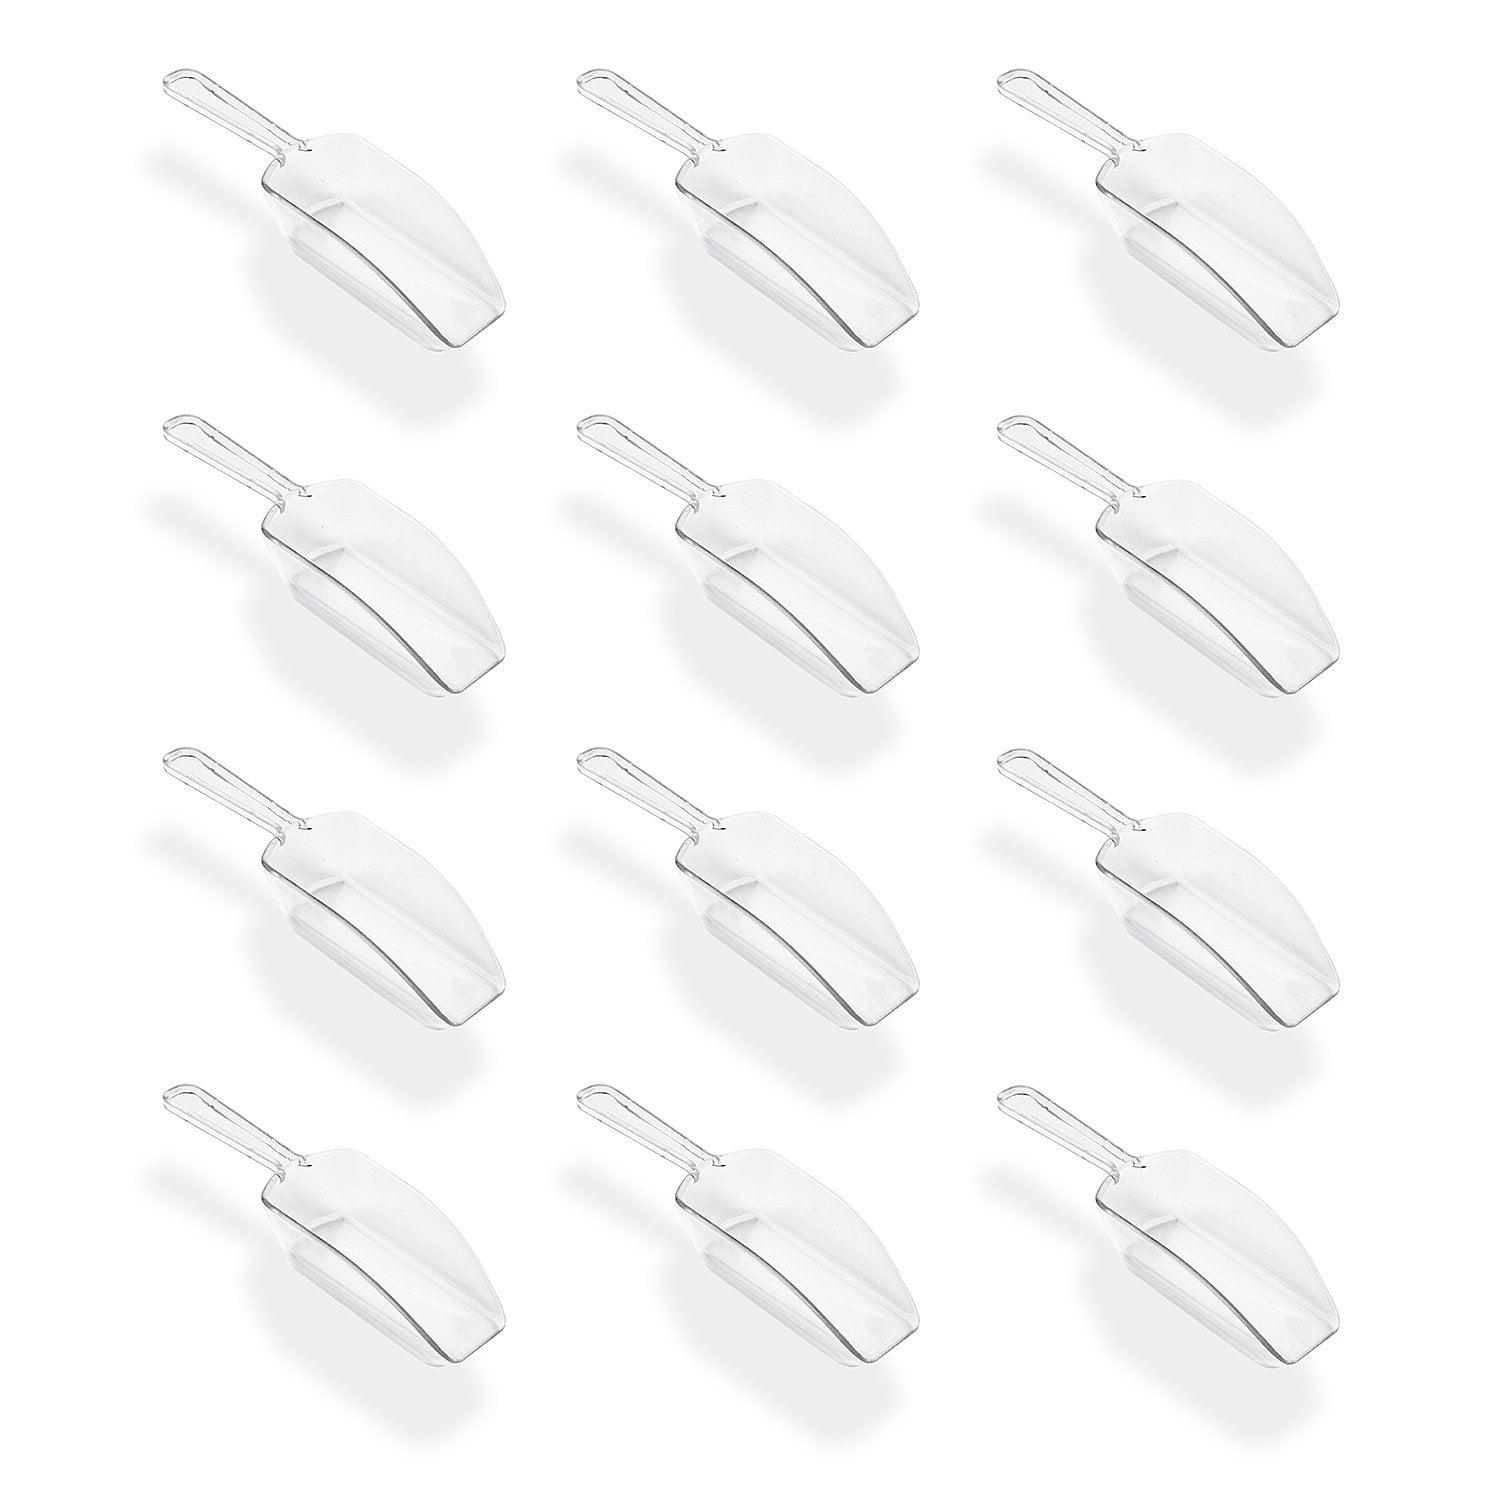 Super Z Outlet 5.5 Mini Clear Acrylic Plastic Kitchen Scoops for Weddings Candy Dessert Buffet Ice Cream Protein Powders Coffee